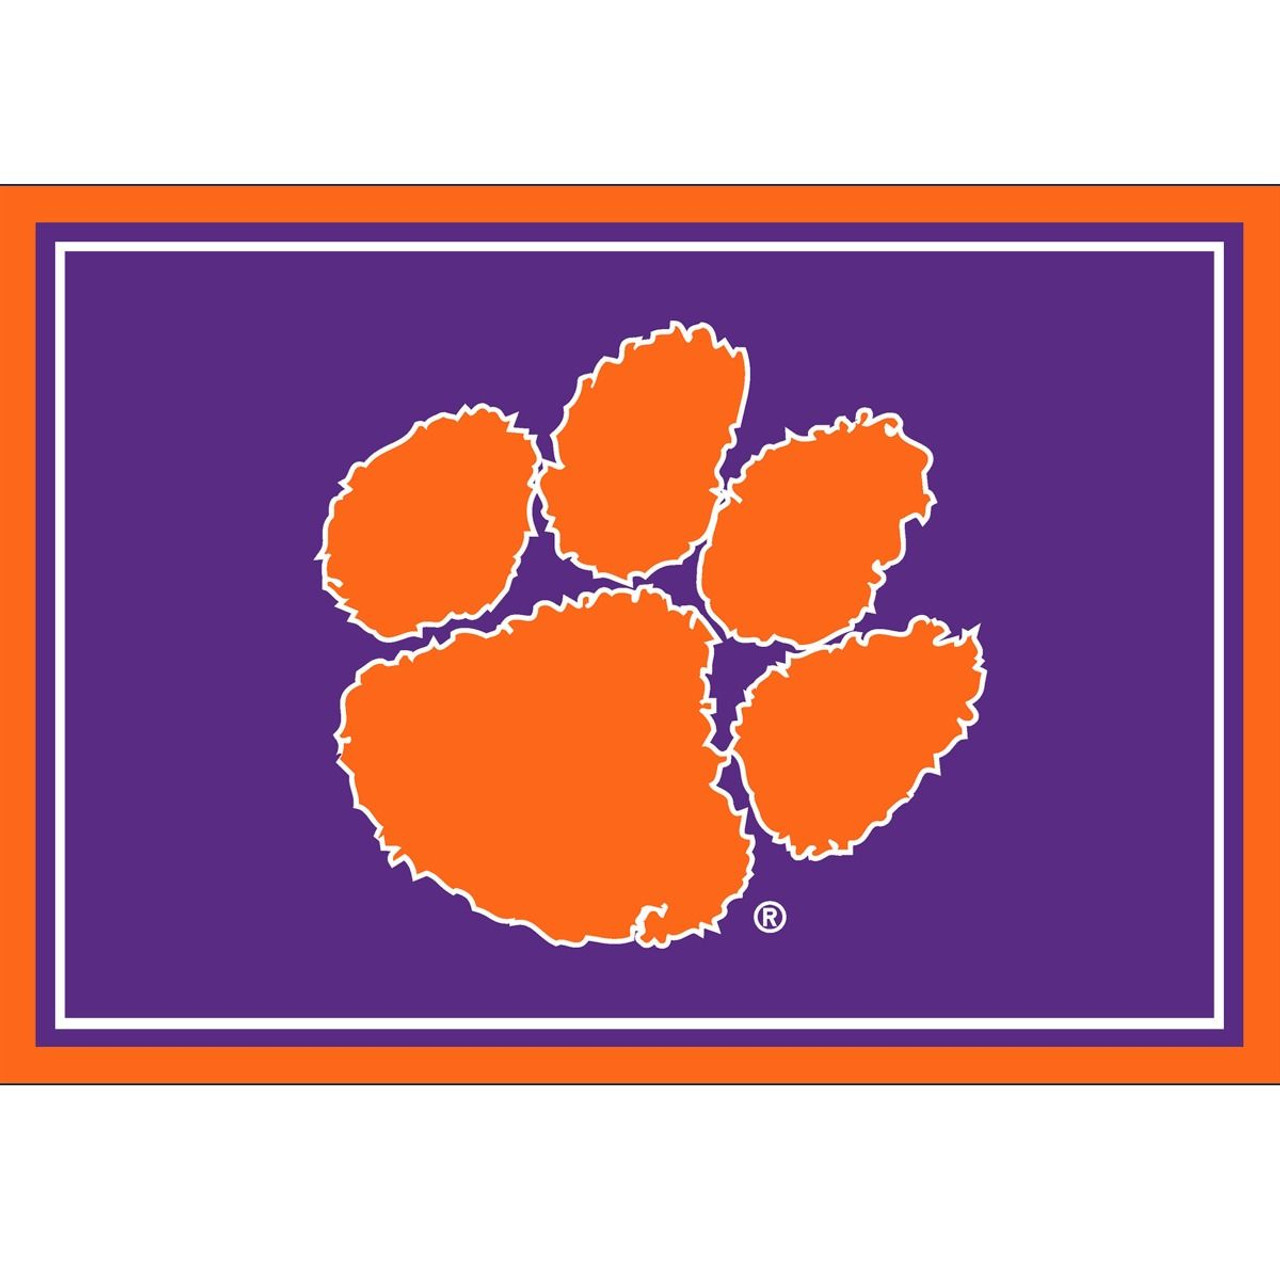 Clemson, Tigers, 3x4, Entry, Rug, 569-3043, Imperial, NCAA, 720801132082